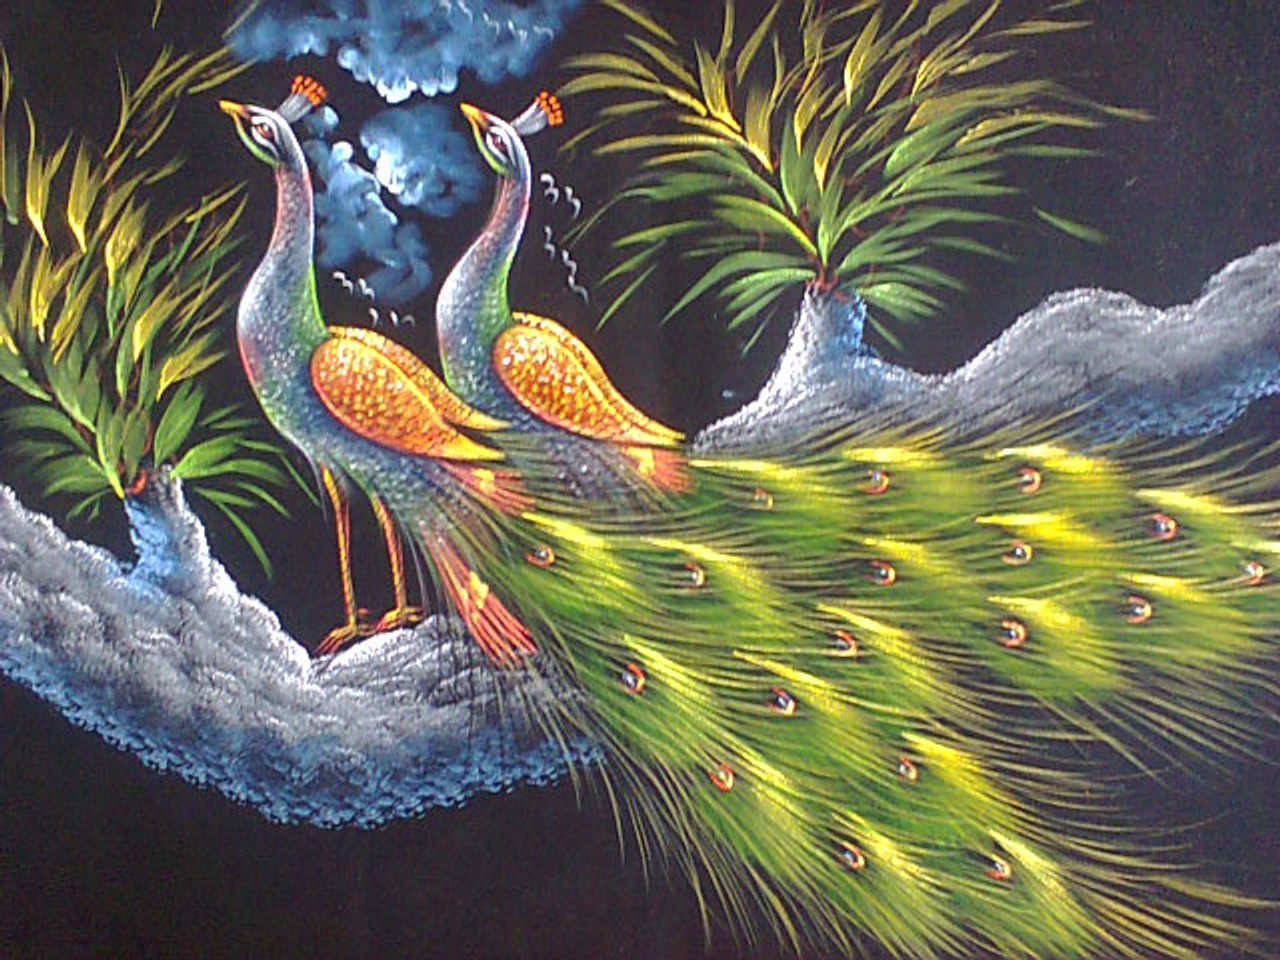 Buy Beautiful Peacock 12 by Community Artists Group@ Rs. 5090 ...